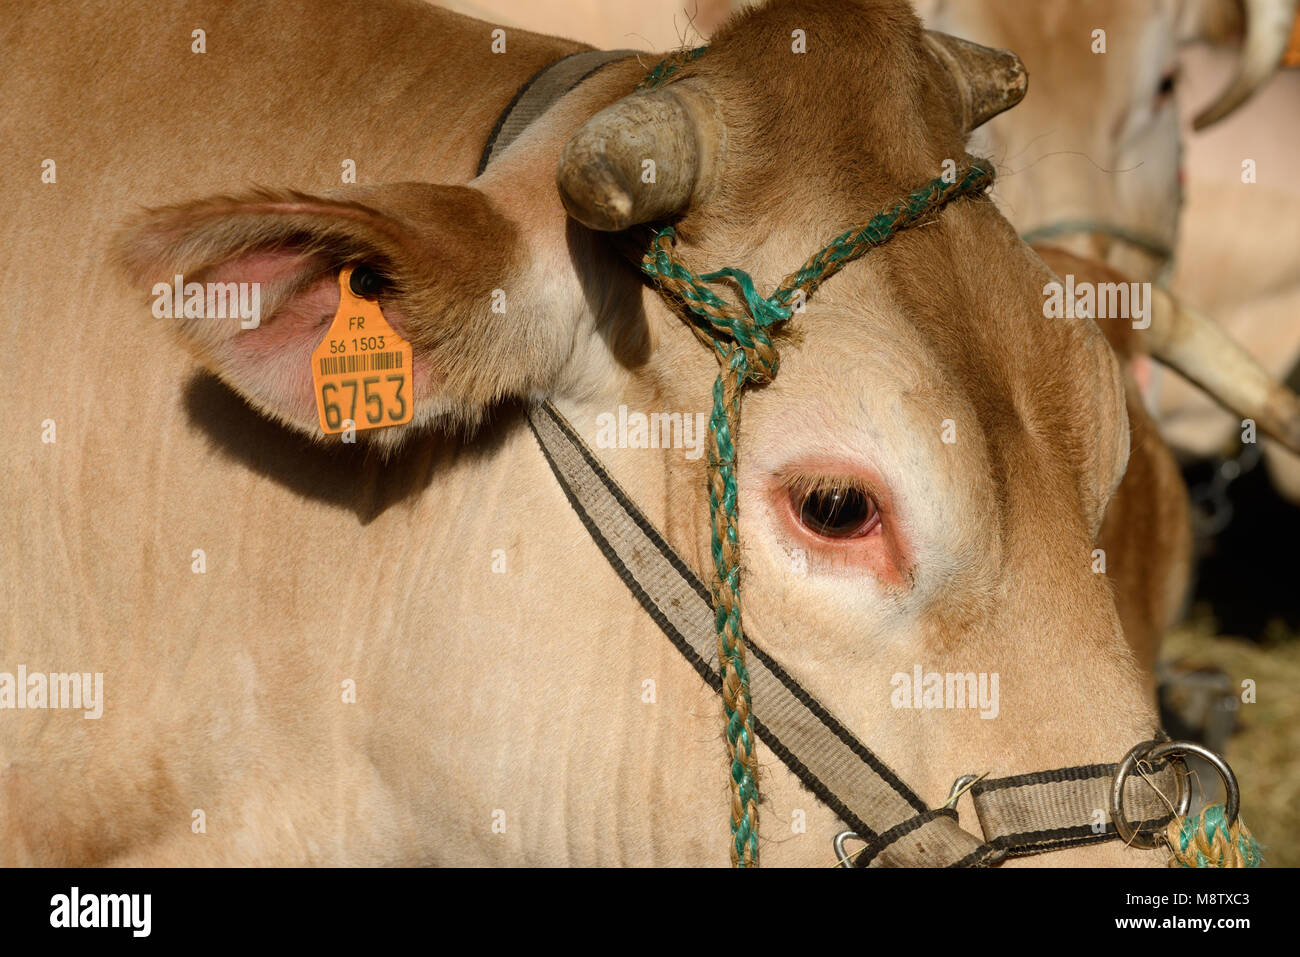 Blonde d'Aquitaine Beef Cow or Cattle with Traceability or Identification Tag Attached to Ear Stock Photo